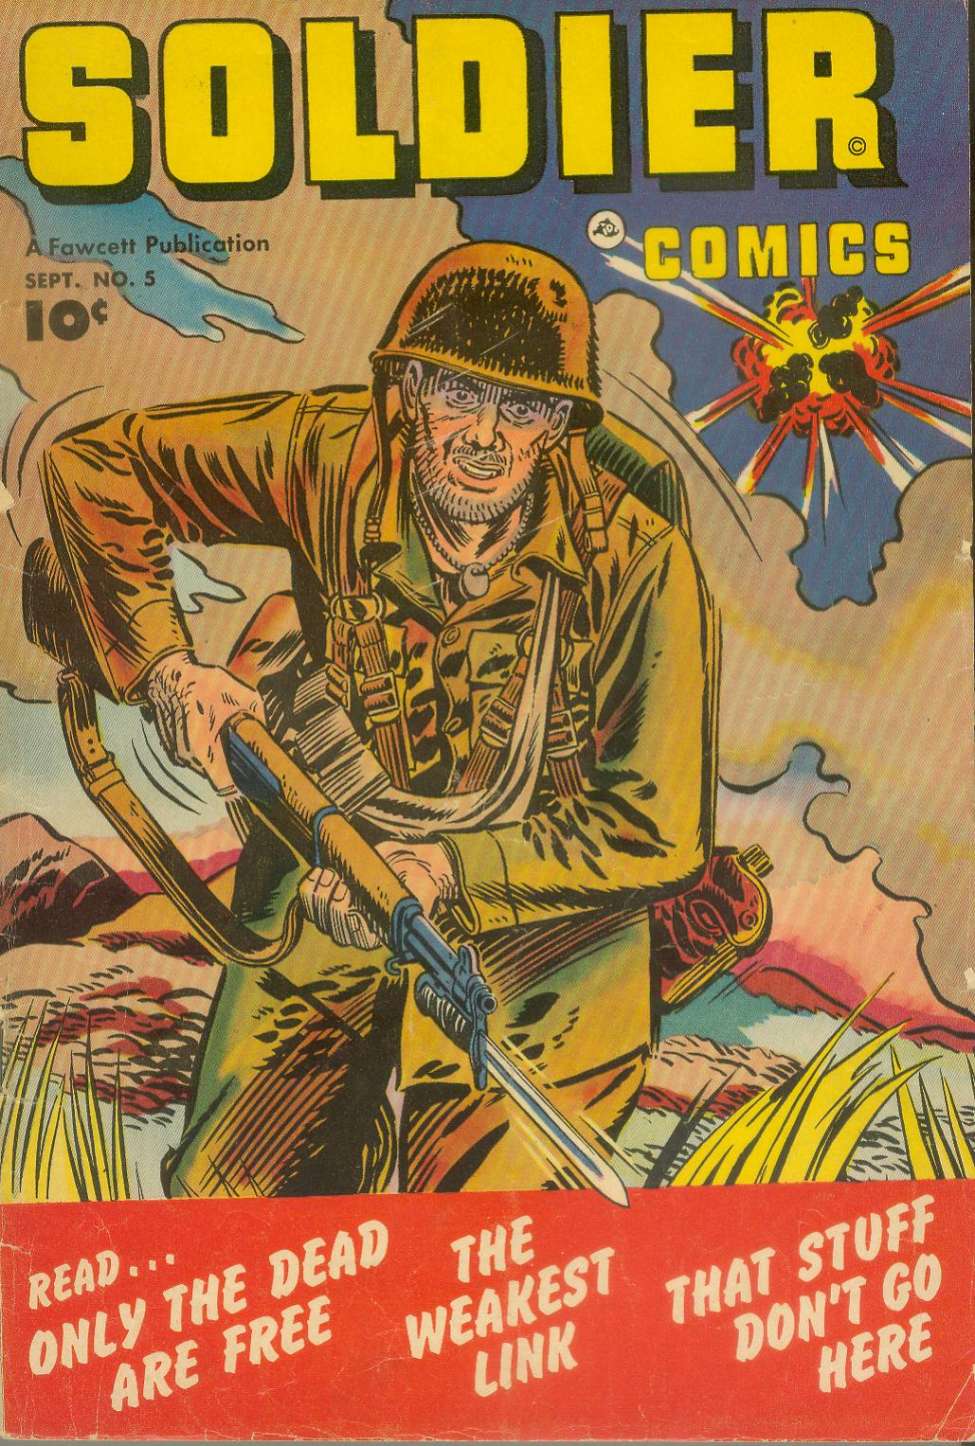 Book Cover For Soldier Comics 5